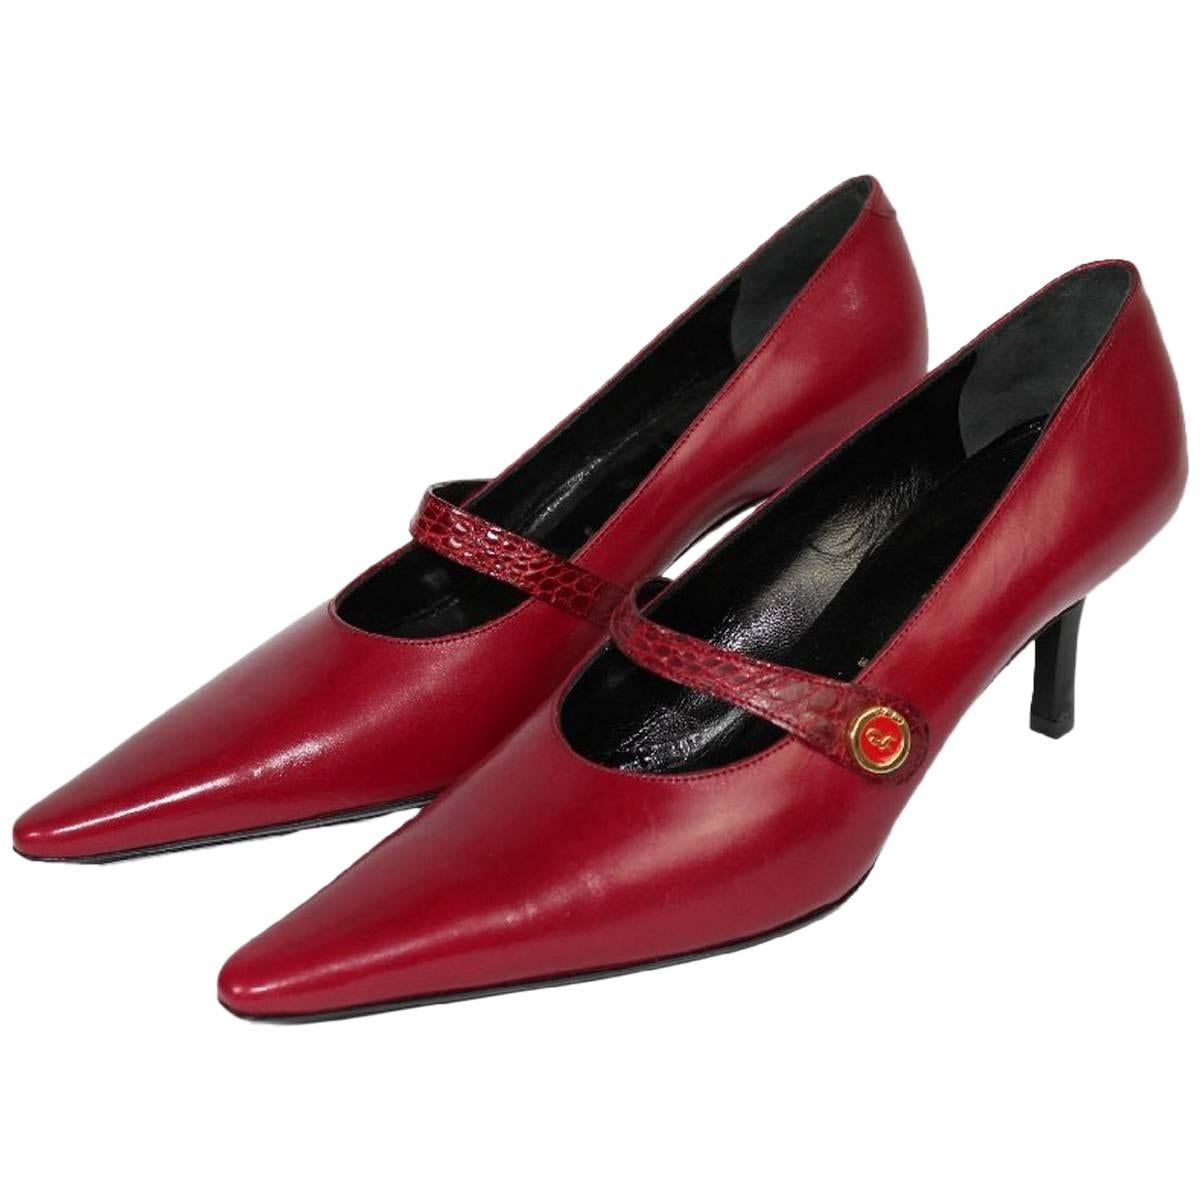 1980s Roberta Di Camerino Red Leather Hells Pumps Shoes For Sale